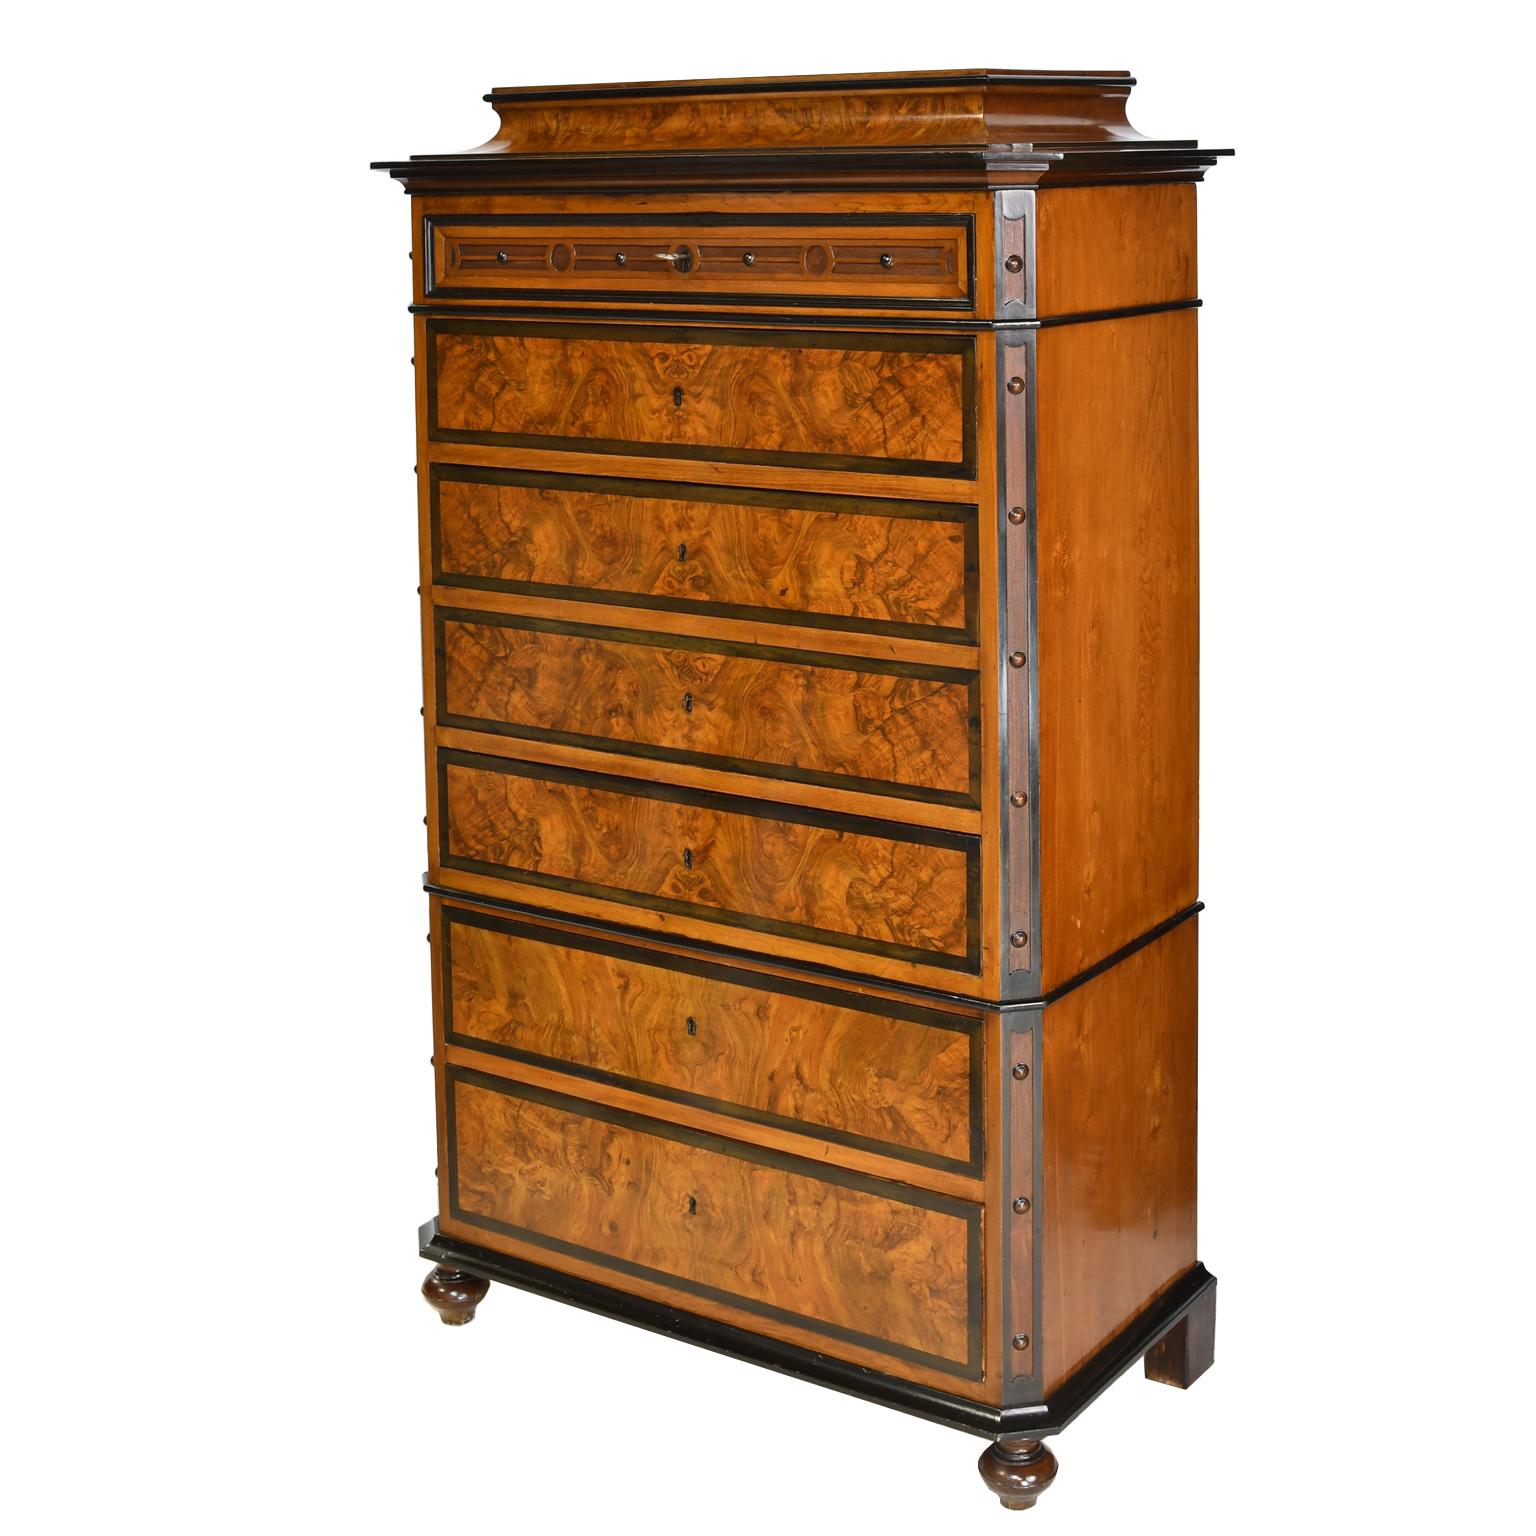 A handsome tall chest on chest in beautiful burled walnut with ebonized accents. Offers seven drawers of variegated heights with  their original working locks and one key, original turned feet, and a distinctive pedestal top. Drawers operate